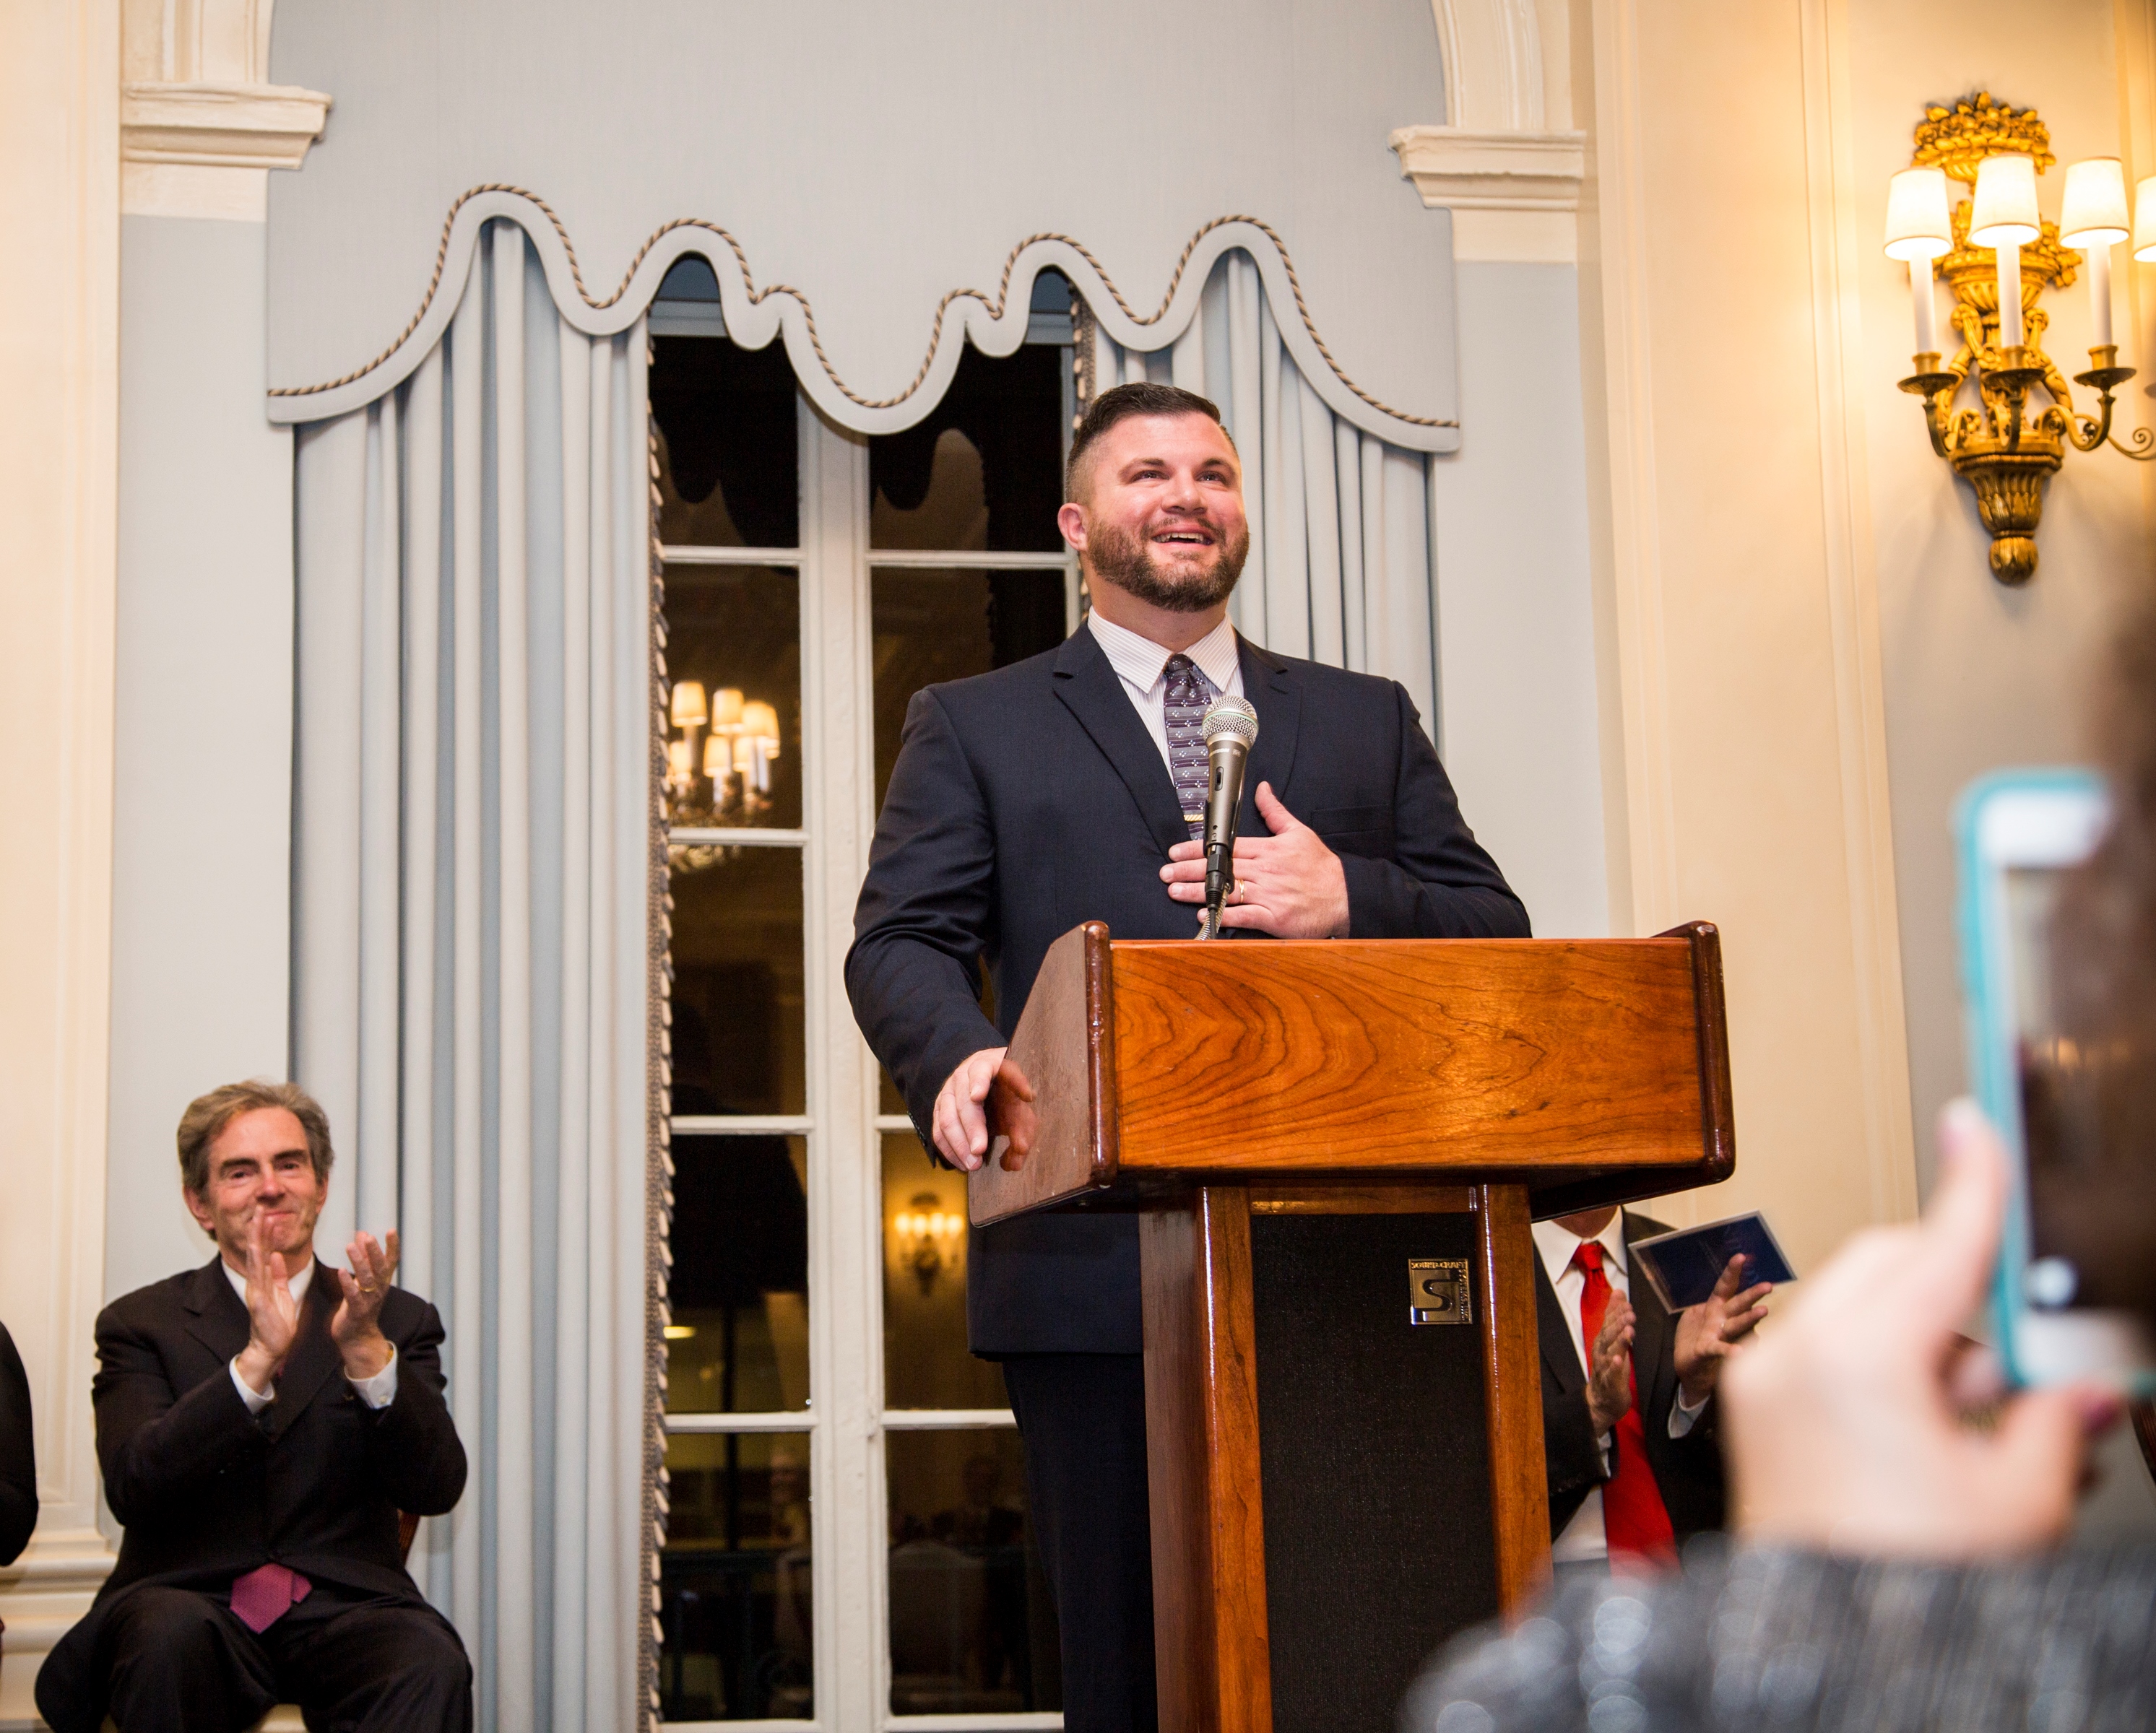 2016 National History Teacher of the Year, Kevin Cline, at his award ceremony in New York